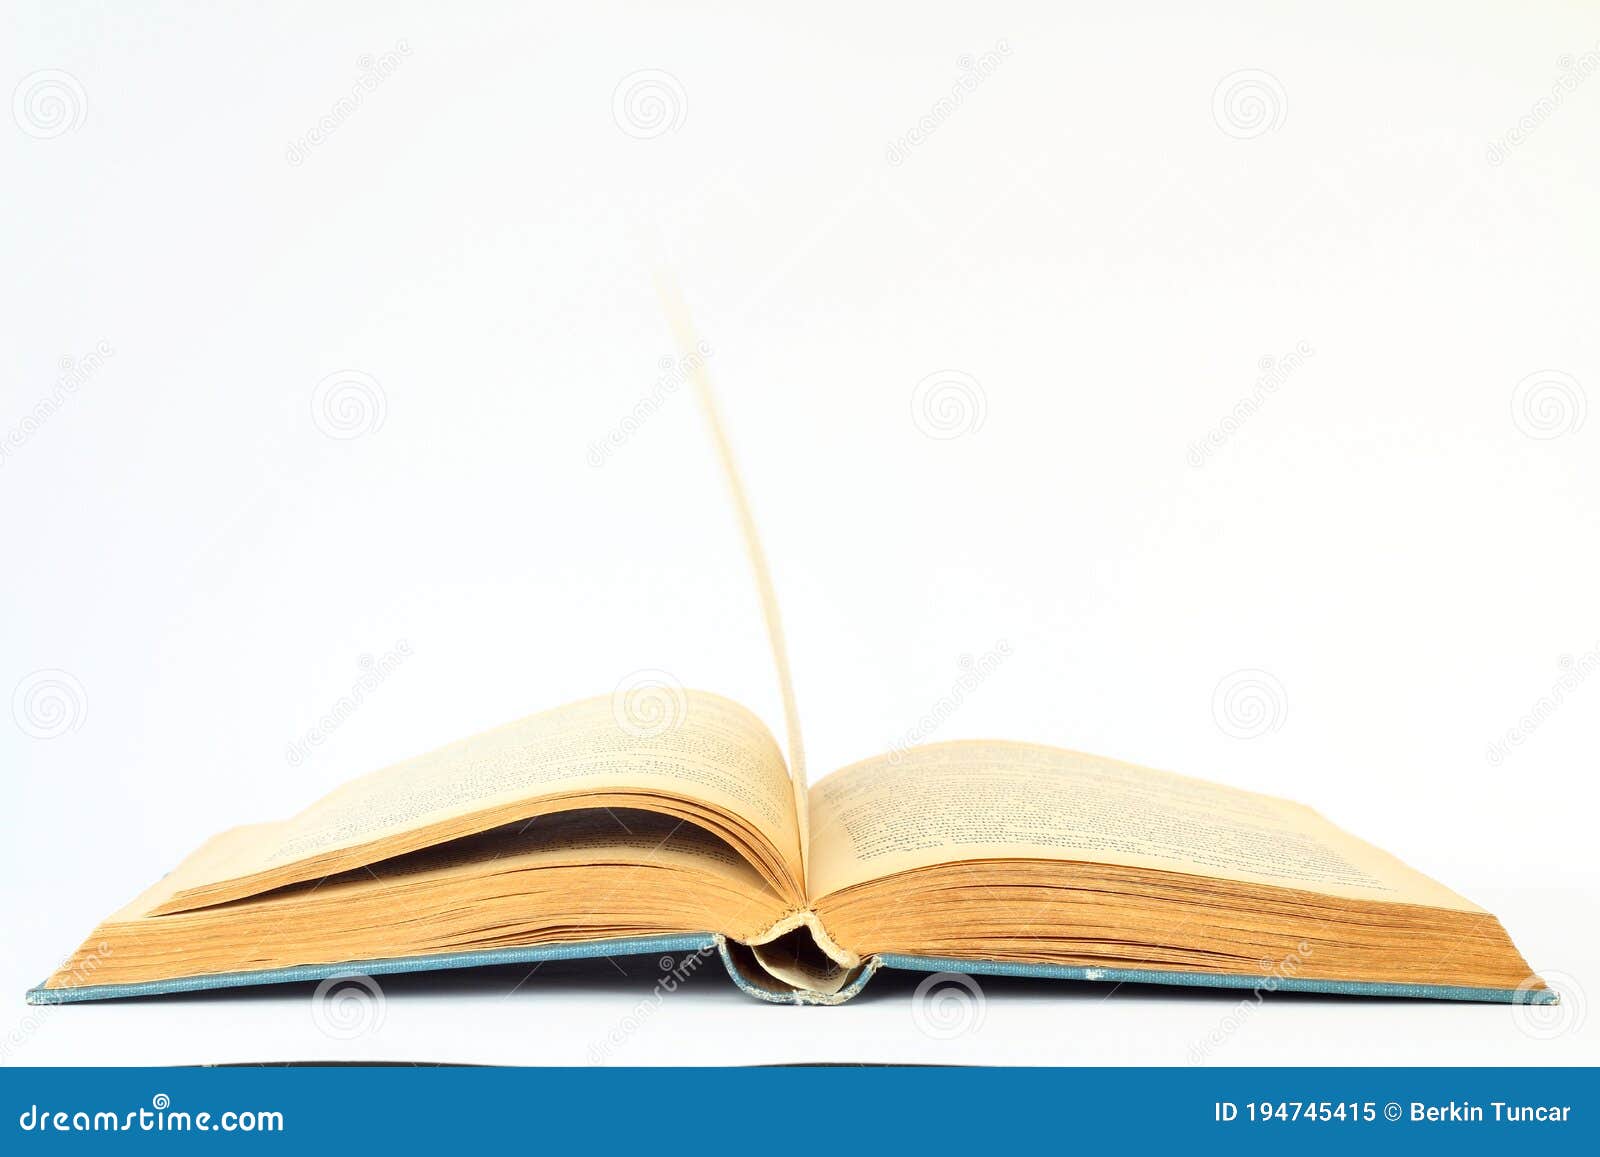 White Opened Book With Blank Pages Stock Image Image Of Copy